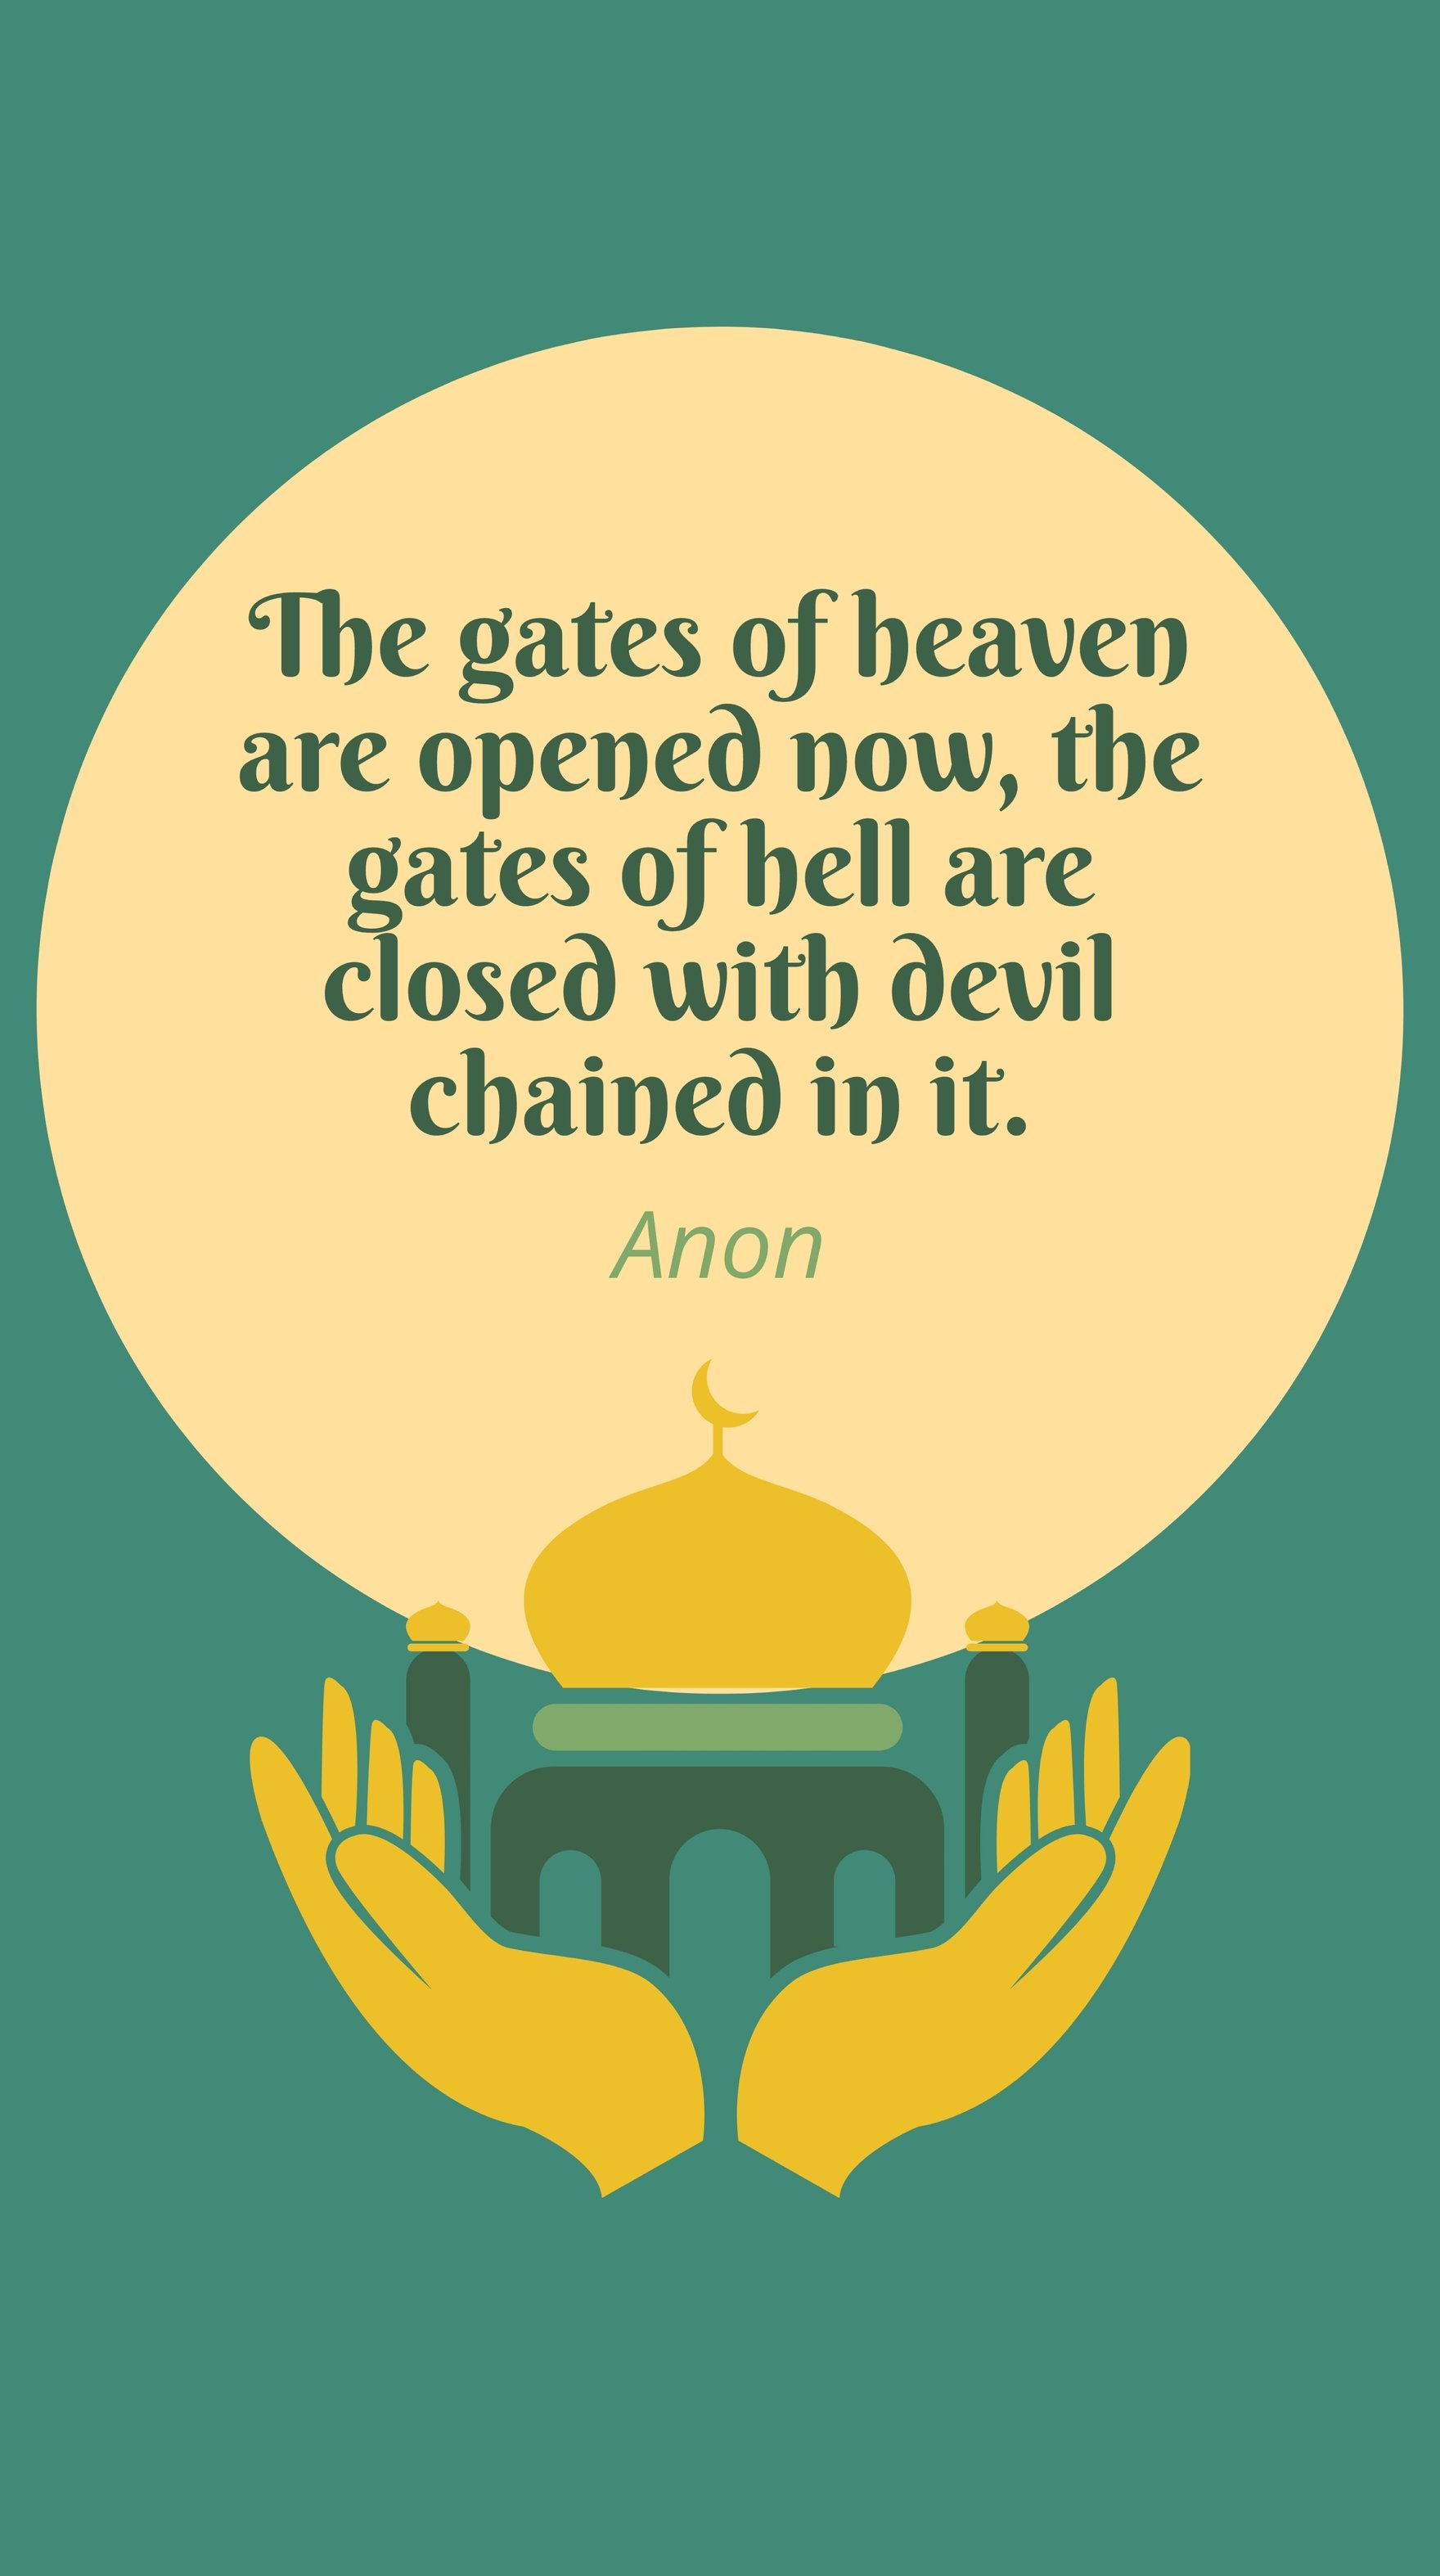 Anon - The gates of heaven are opened now, the gates of hell are closed with devil chained in it. in JPG